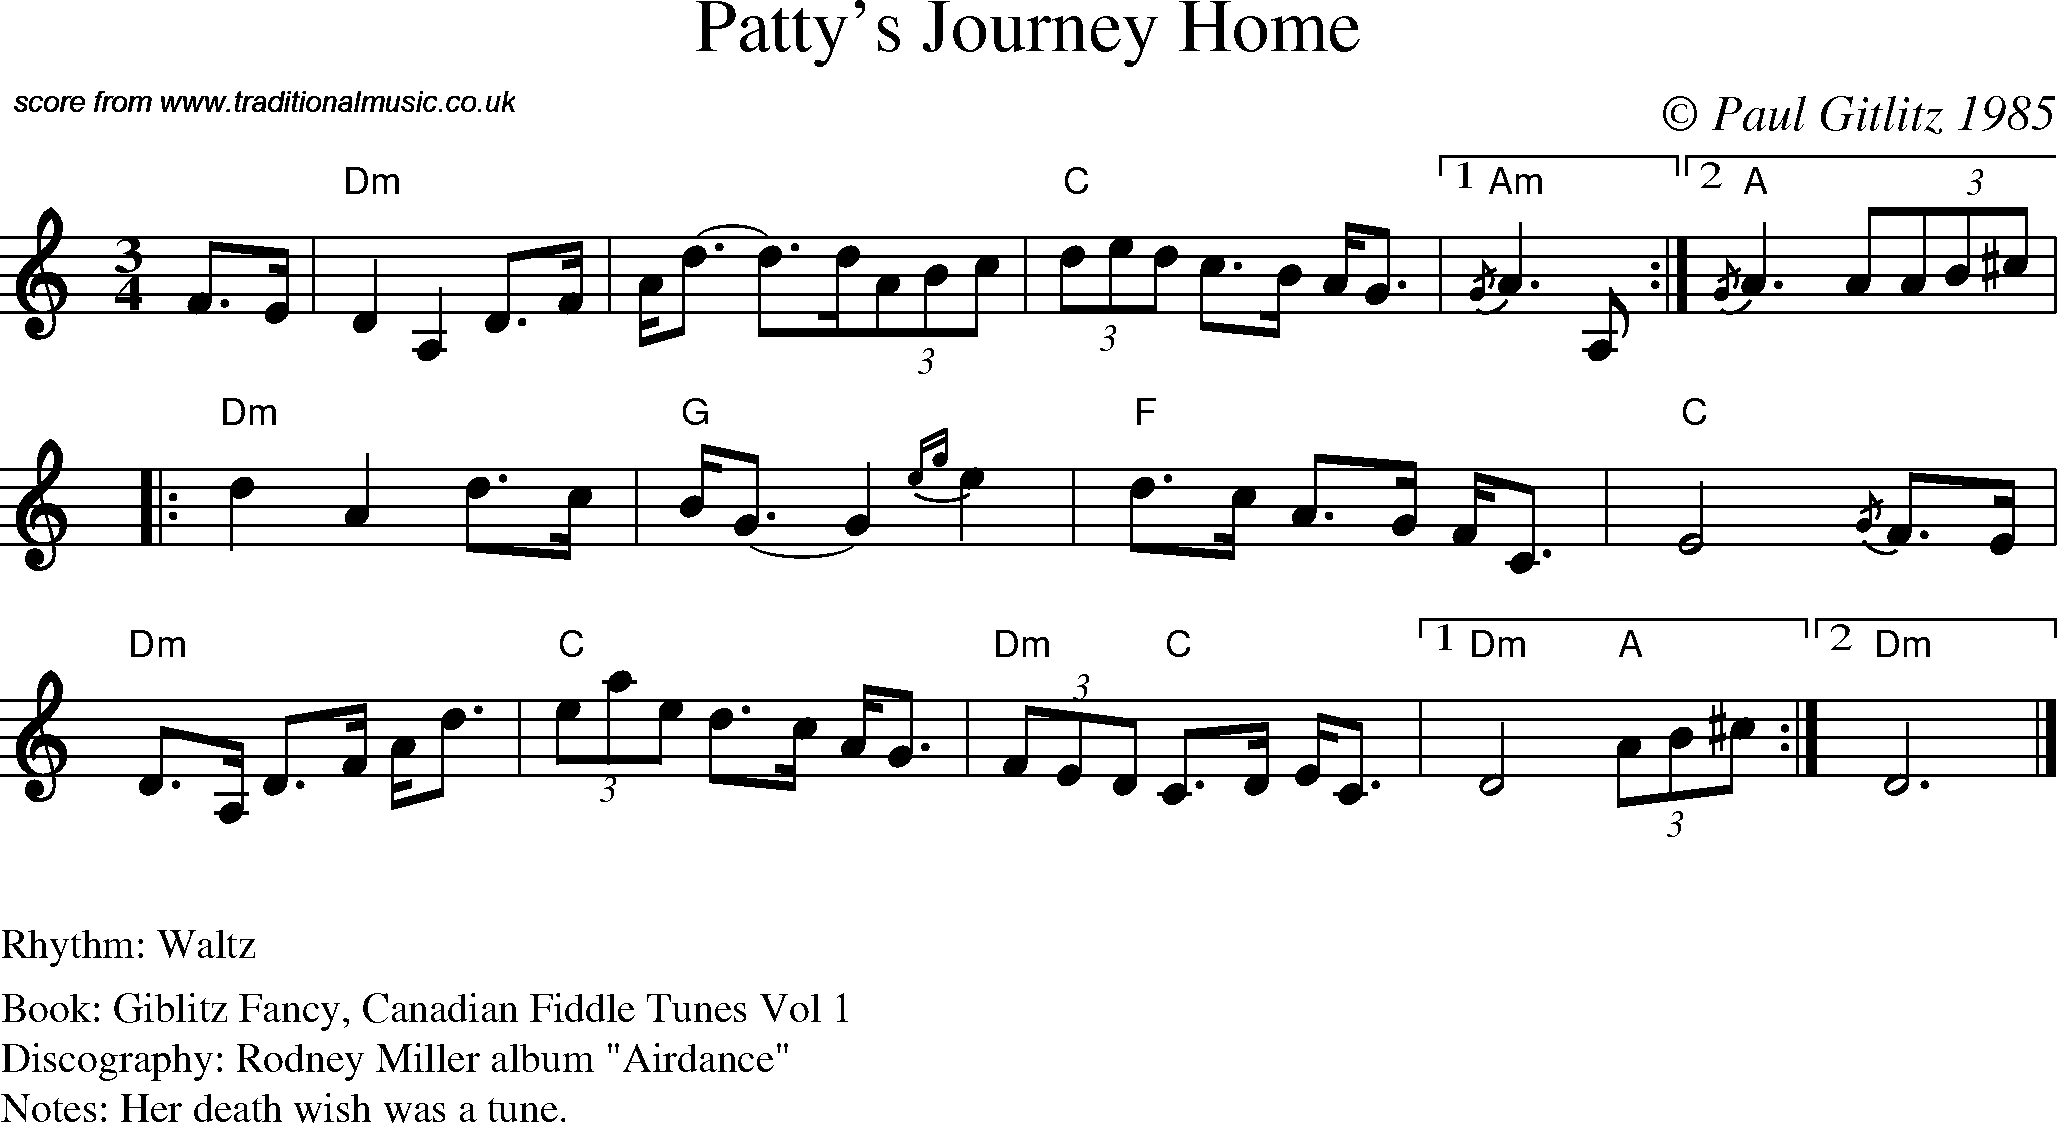 Sheet Music Score for Waltz - Patty's Journey Home